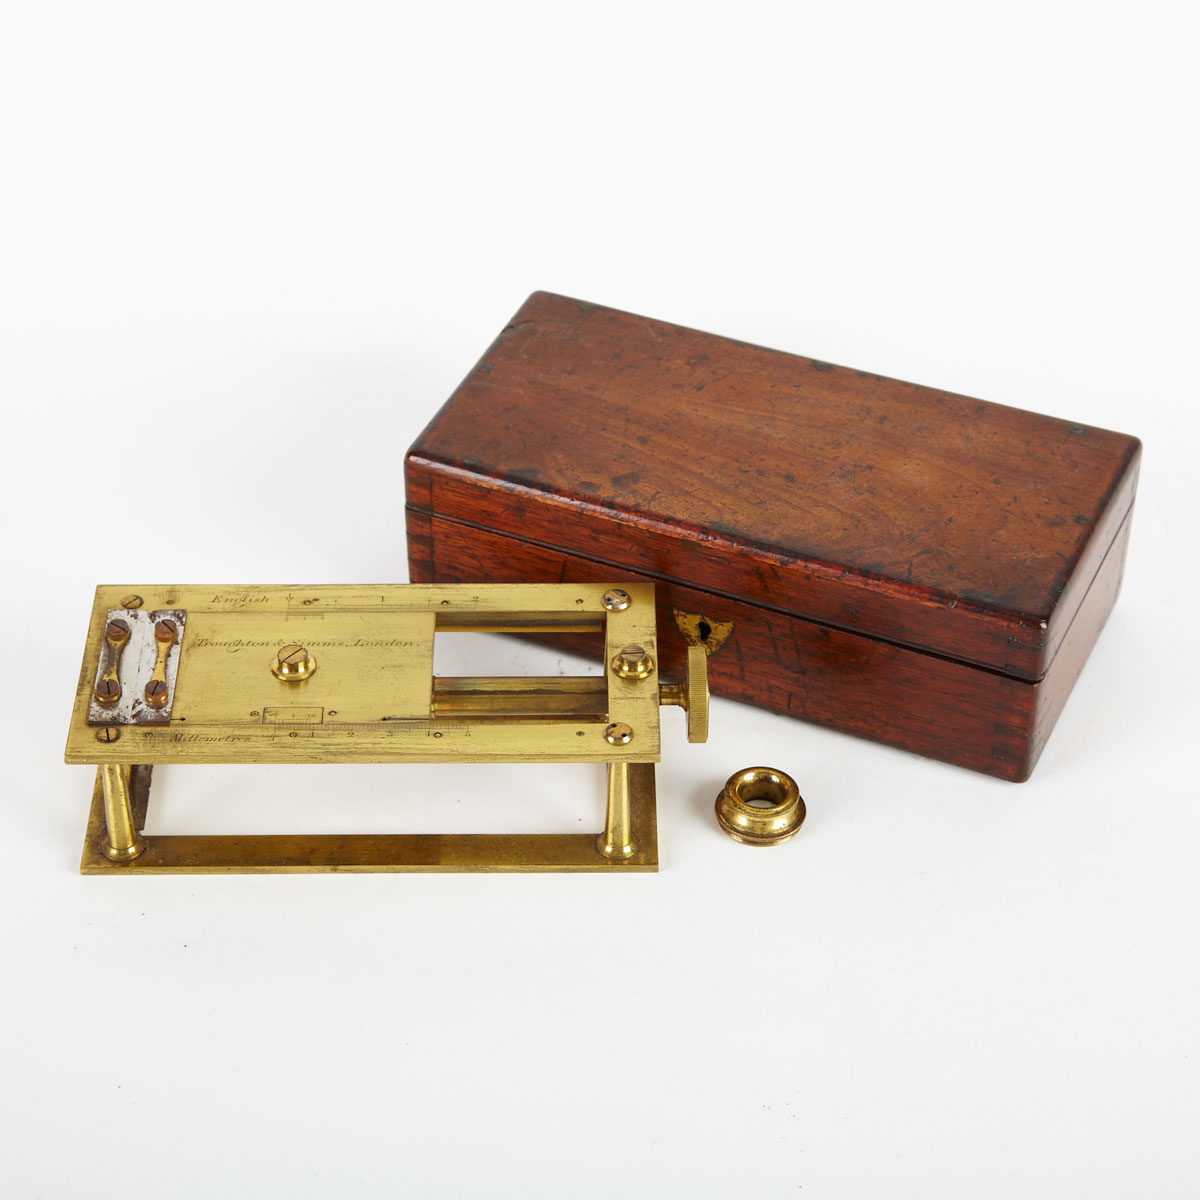 English Lacquered Brass Bench Micrometer